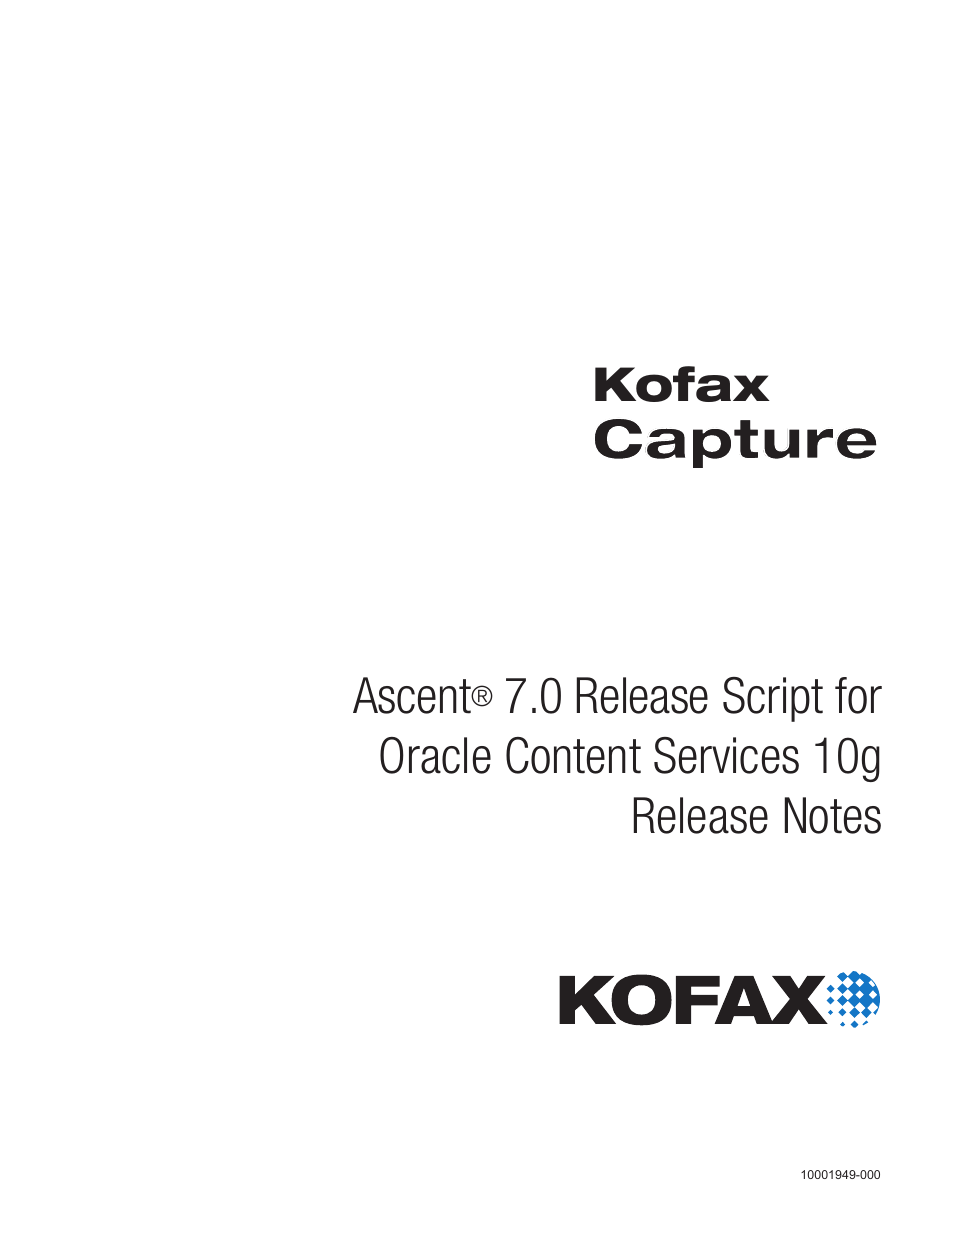 Kofax Ascen 7.0 Release Script for Oracle Content Services 10g User Manual | 34 pages